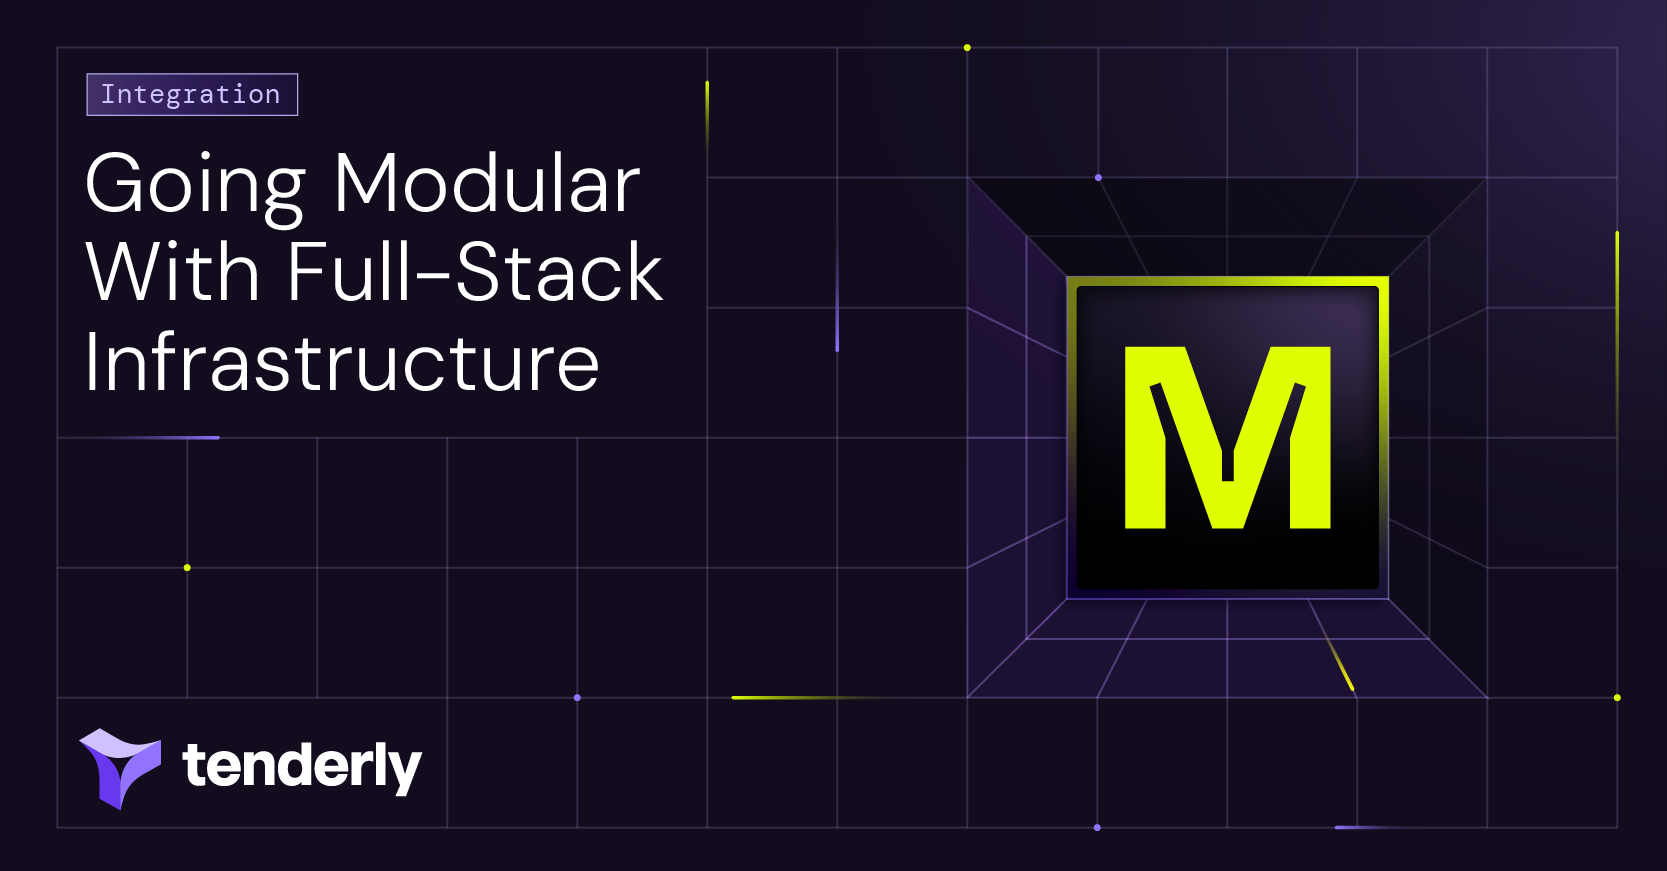 Tenderly's full-stack infrastructure is now available on Mode L2 network